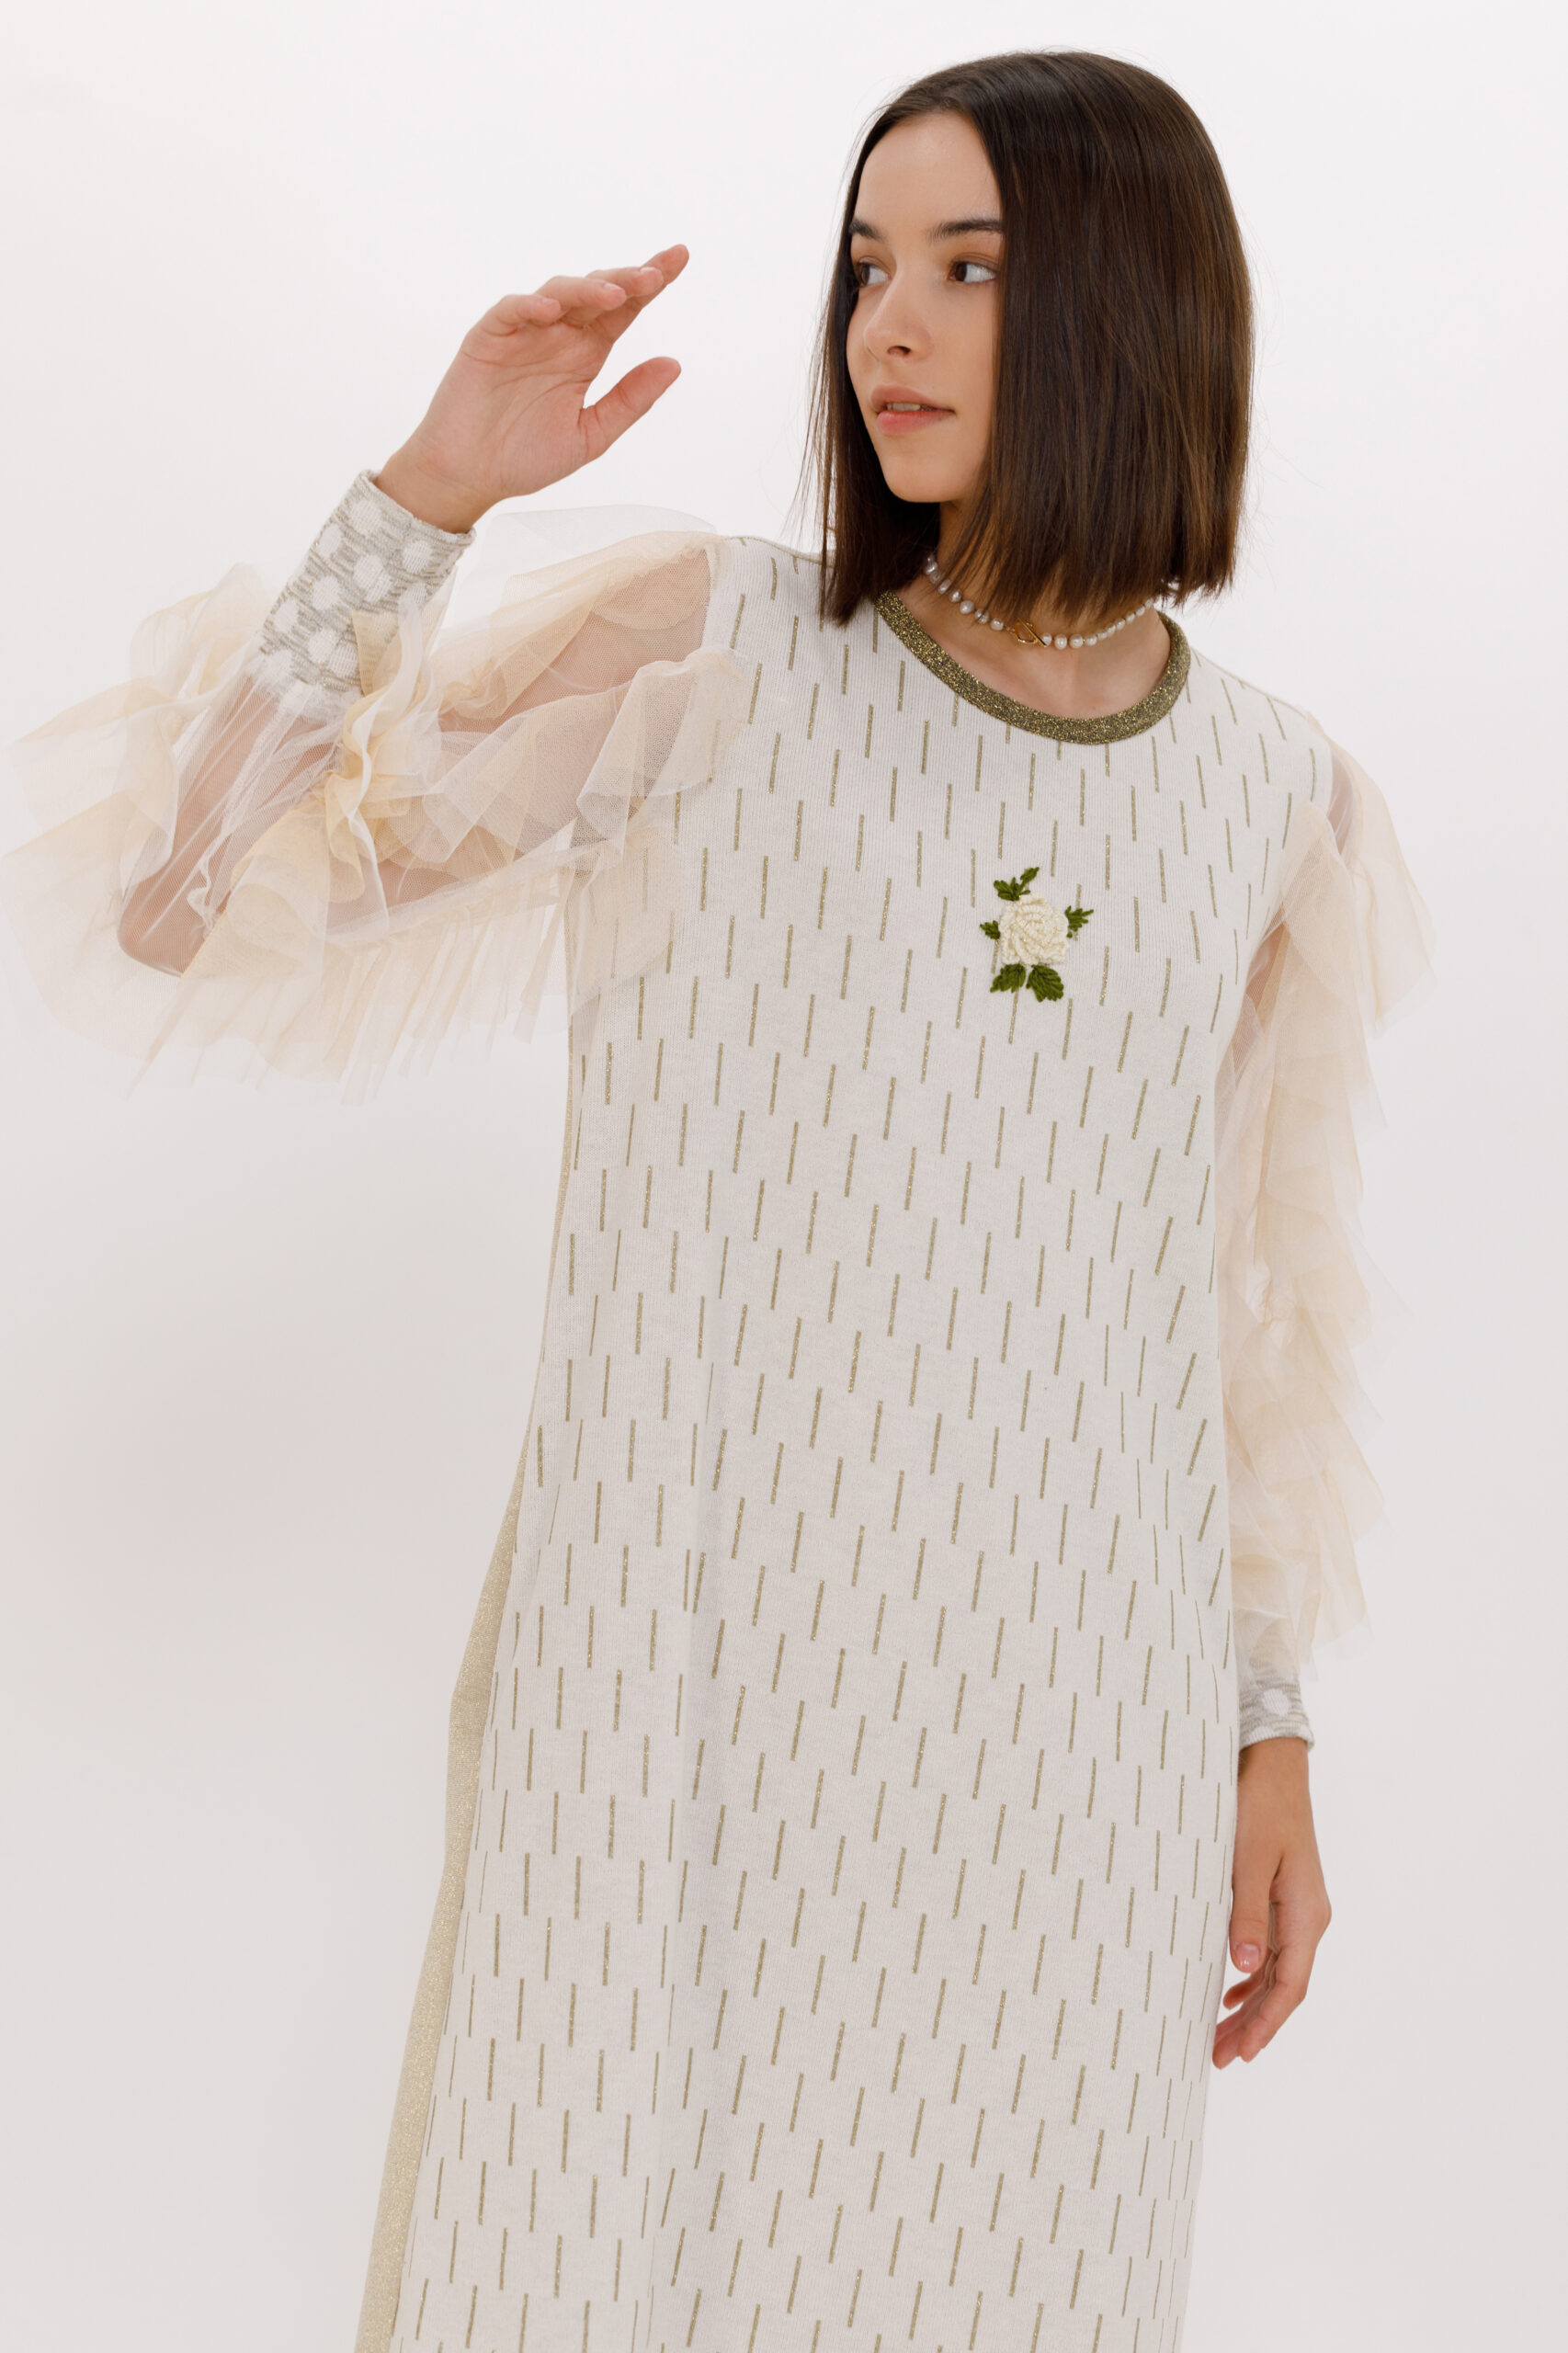 ANGEL casual dress with tulle ruffles on the sleeves. Natural fabrics, original design, handmade embroidery